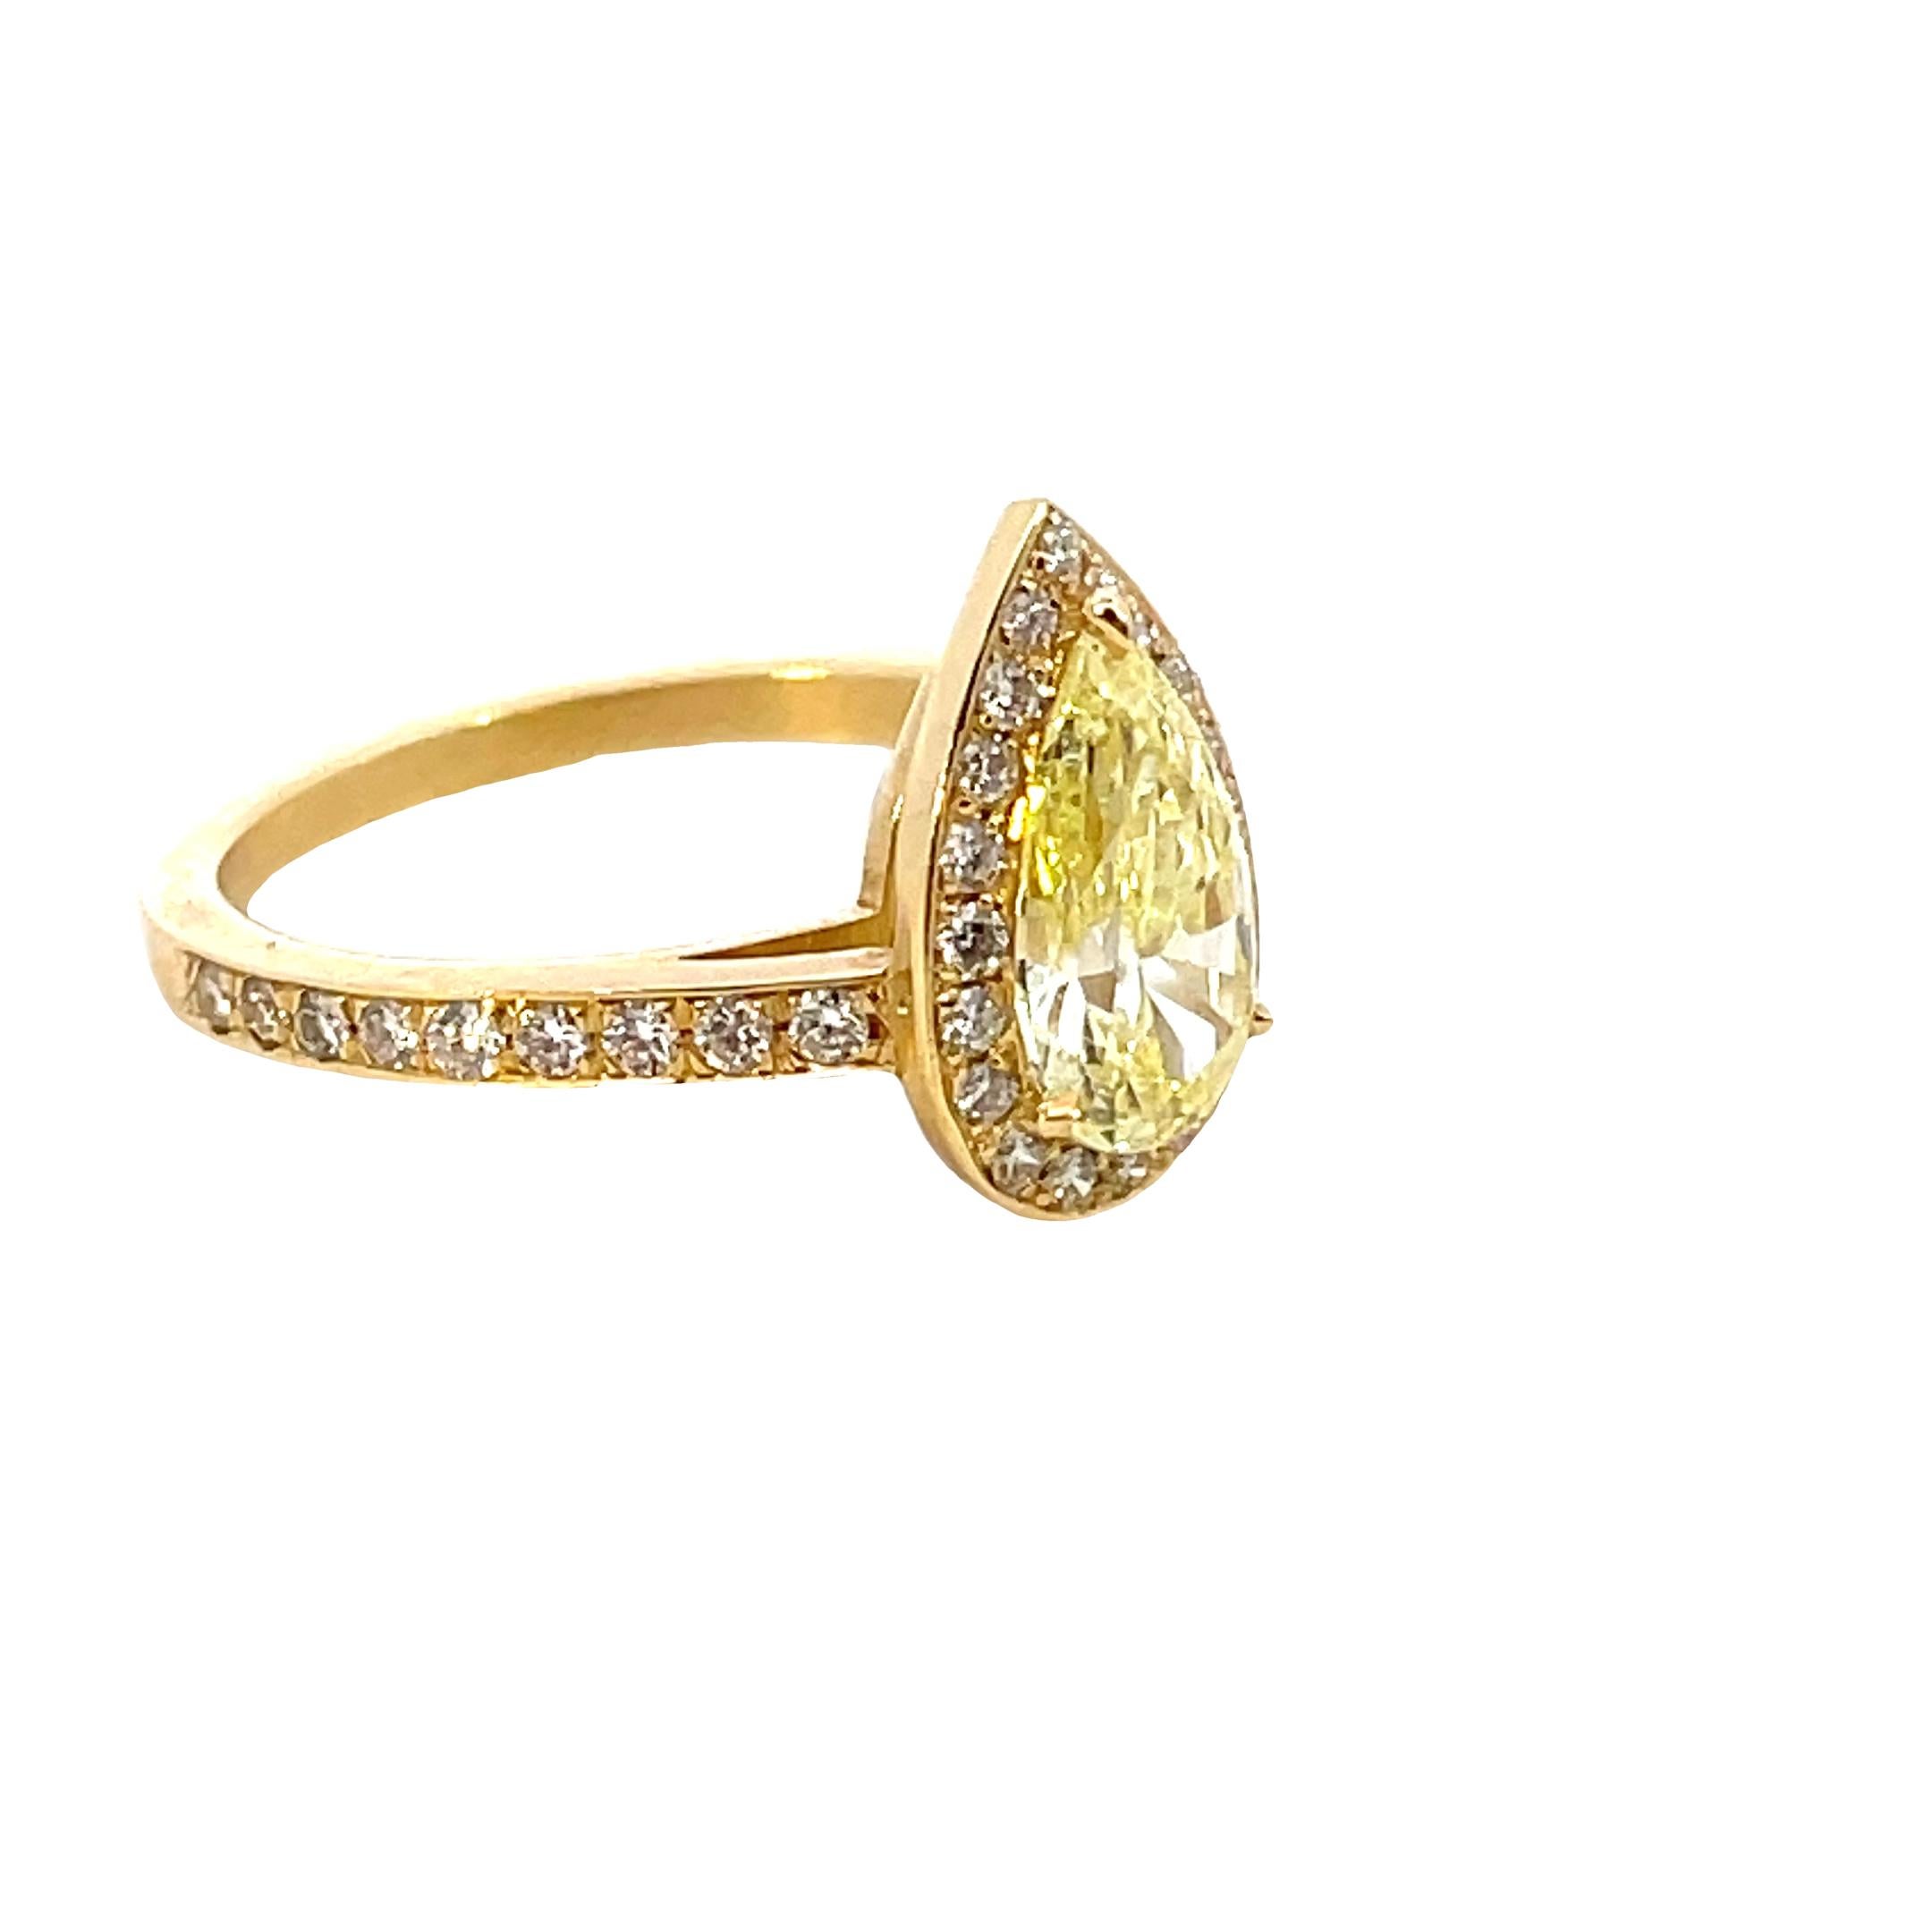 1.20 cts Fancy Yellow Diamond Ring Pear Shape, surrounded by White round diamonds; Mounting Made in Italy the ring is brand new.
Comes wit a Fitted Box
